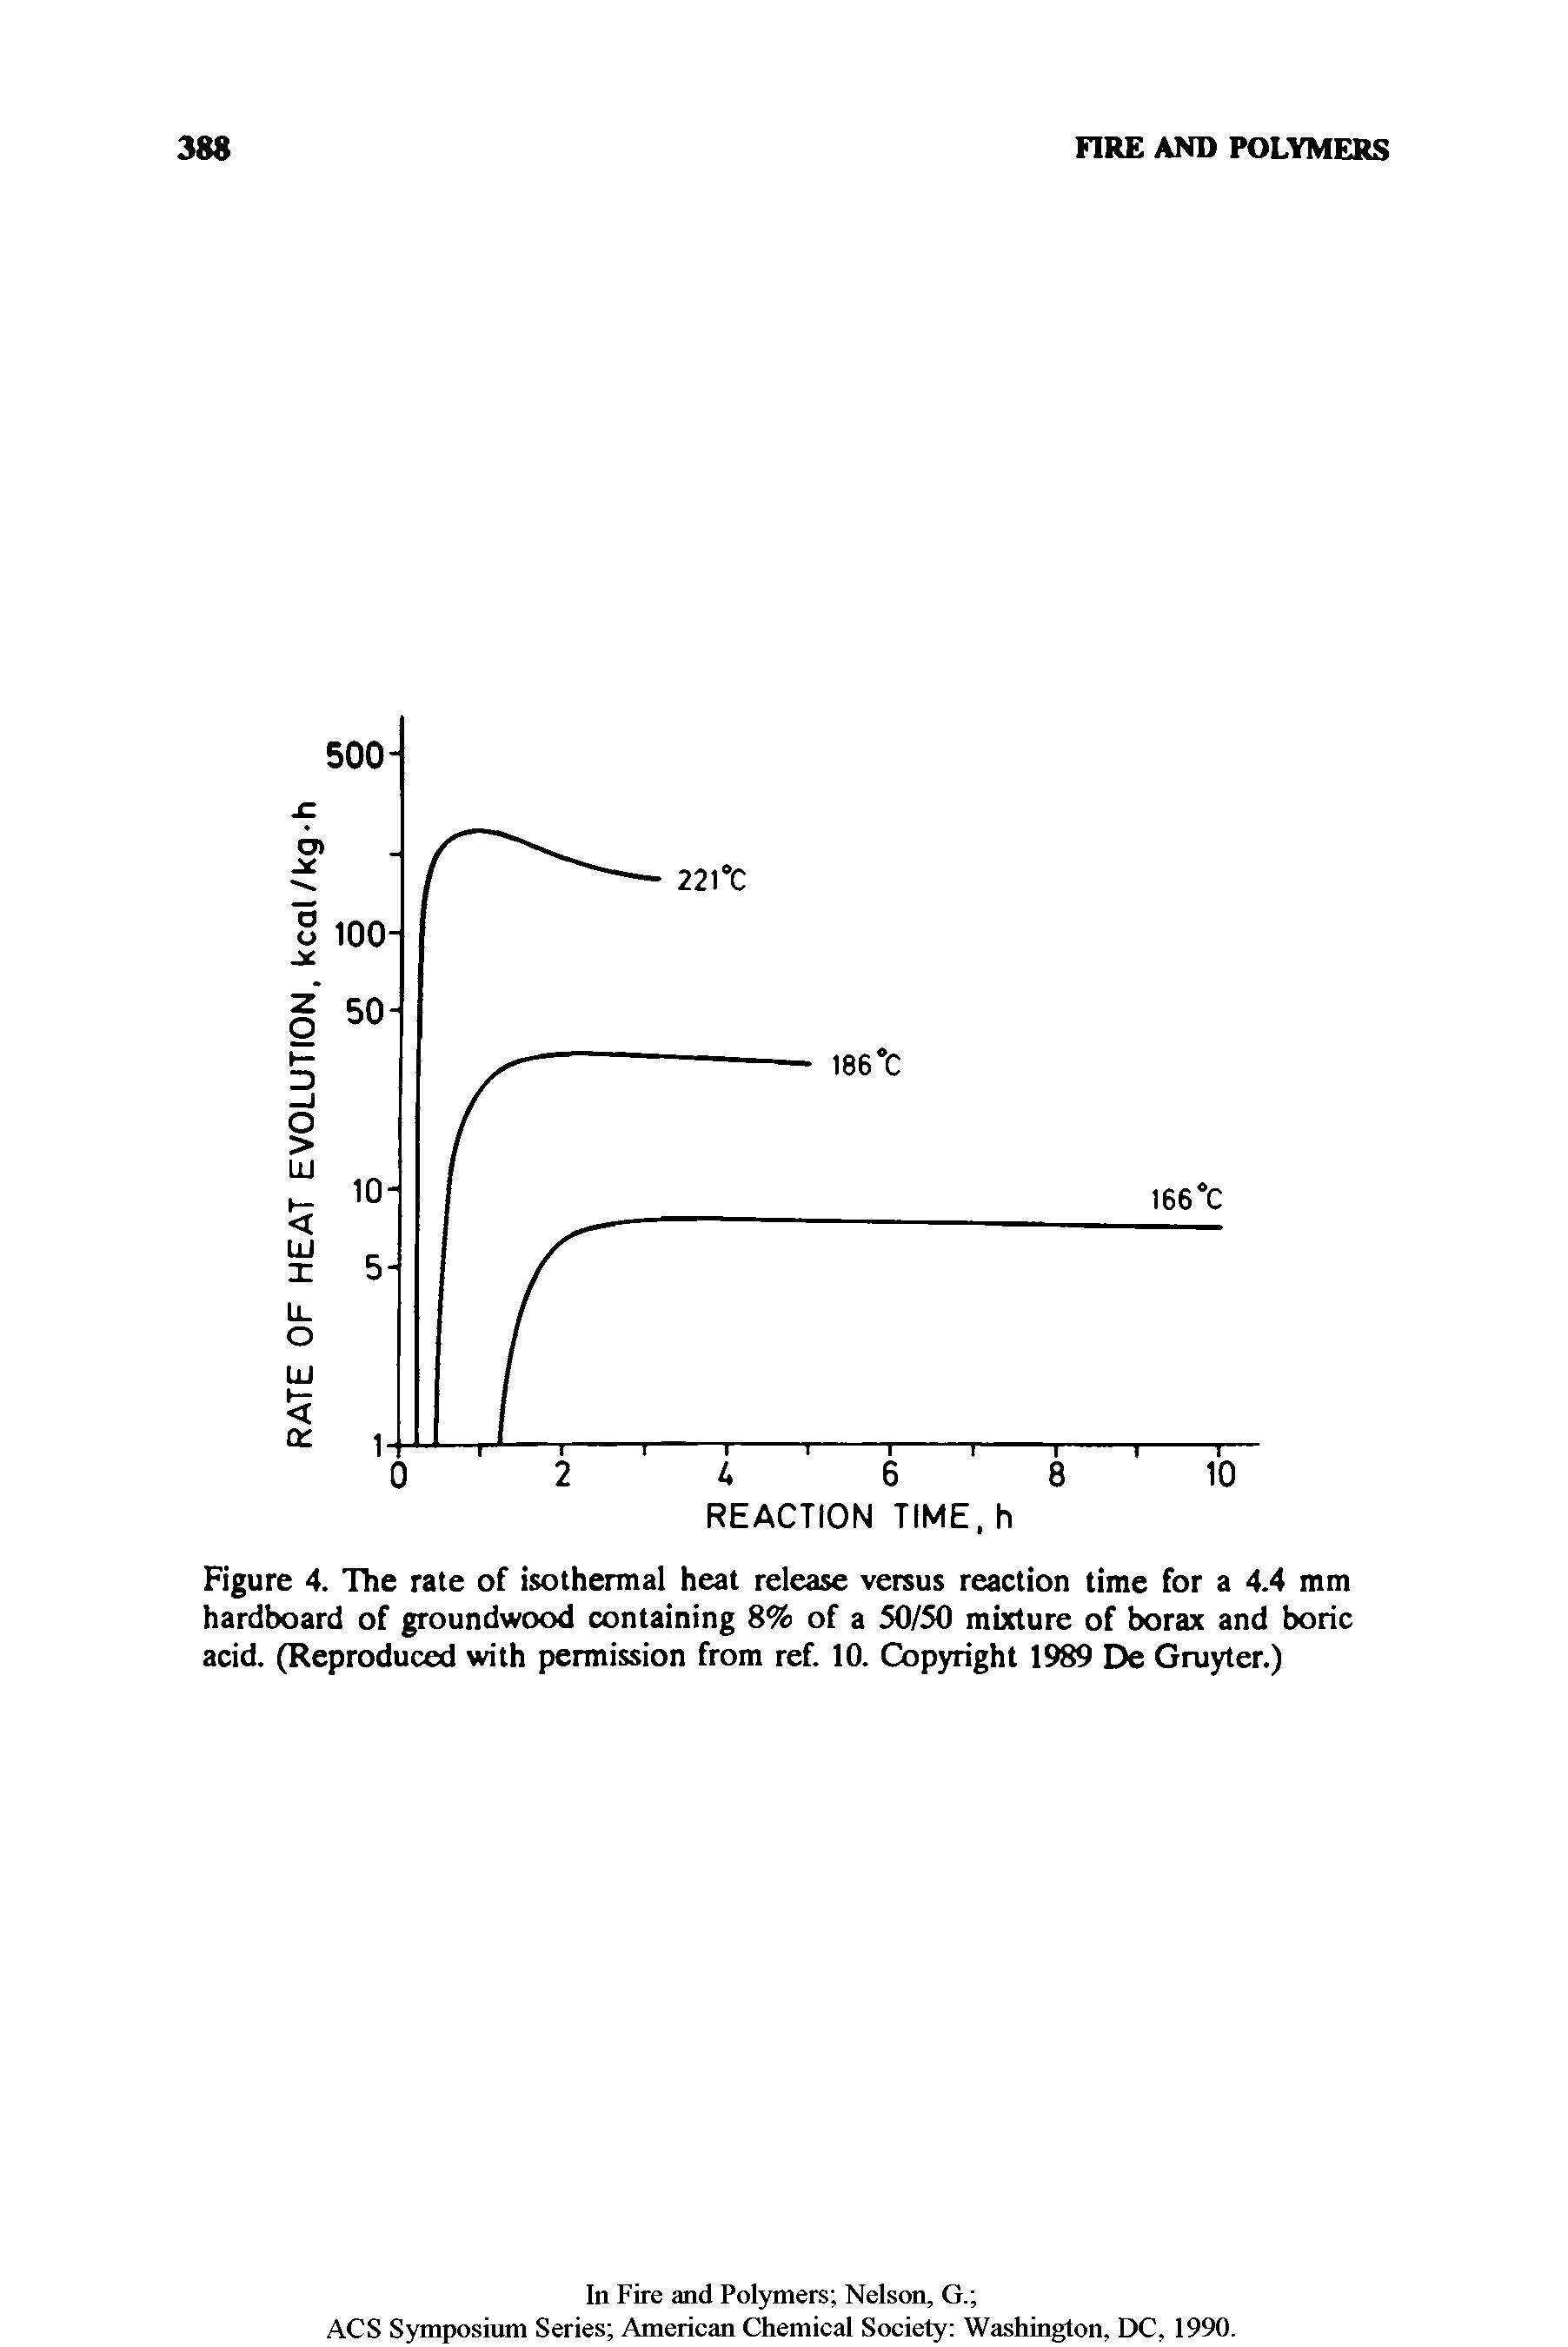 Figure 4. The rate of isothermal heat release versus reaction time for a 4.4 mm hardboard of groundwood containing 8% of a 50/50 mixture of borax and boric acid. (Reproduced with permission from ref. 10. Copyright 1989 De Gruyter.)...